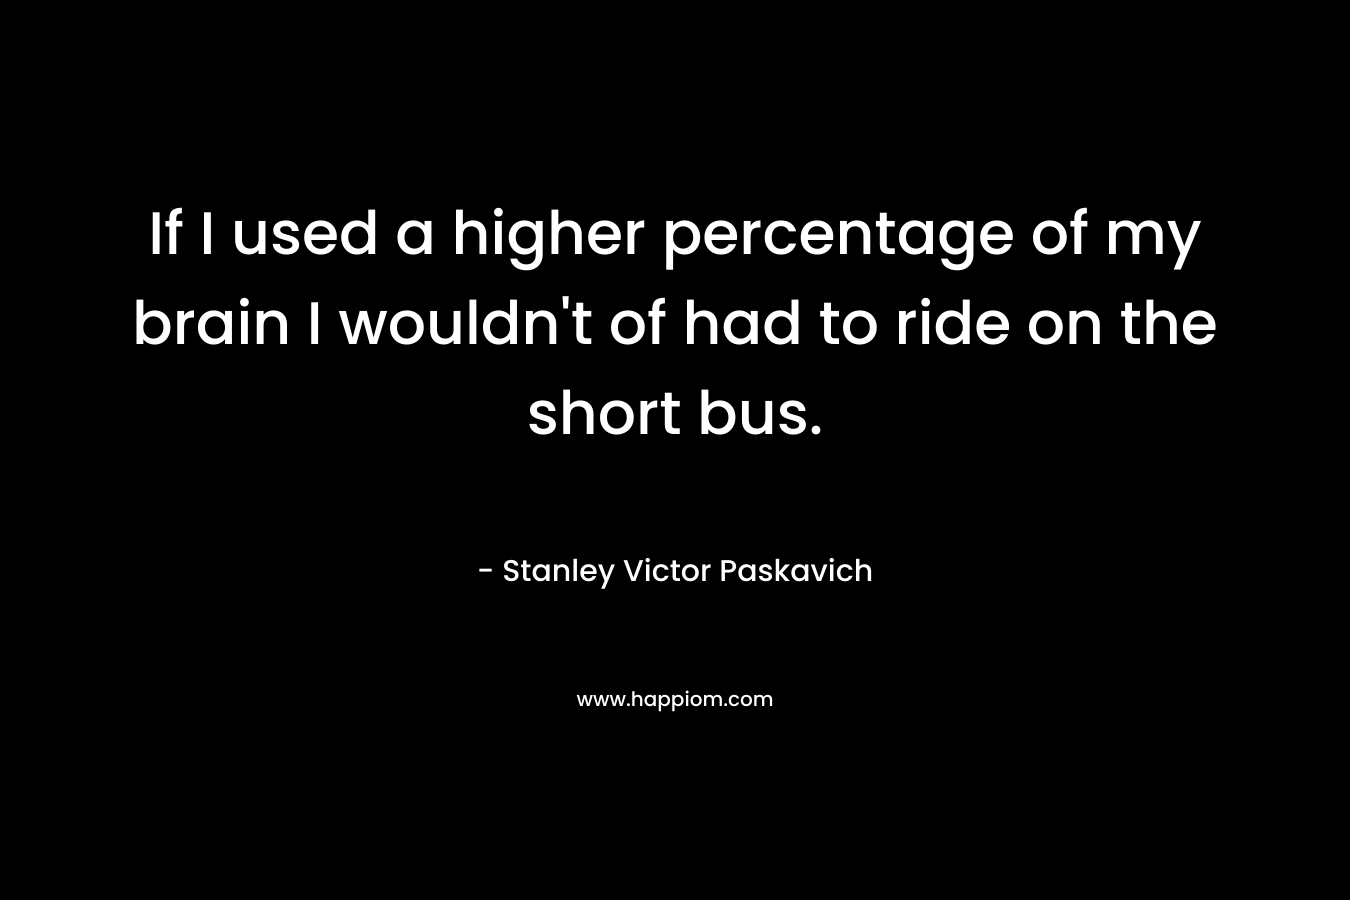 If I used a higher percentage of my brain I wouldn’t of had to ride on the short bus. – Stanley Victor Paskavich